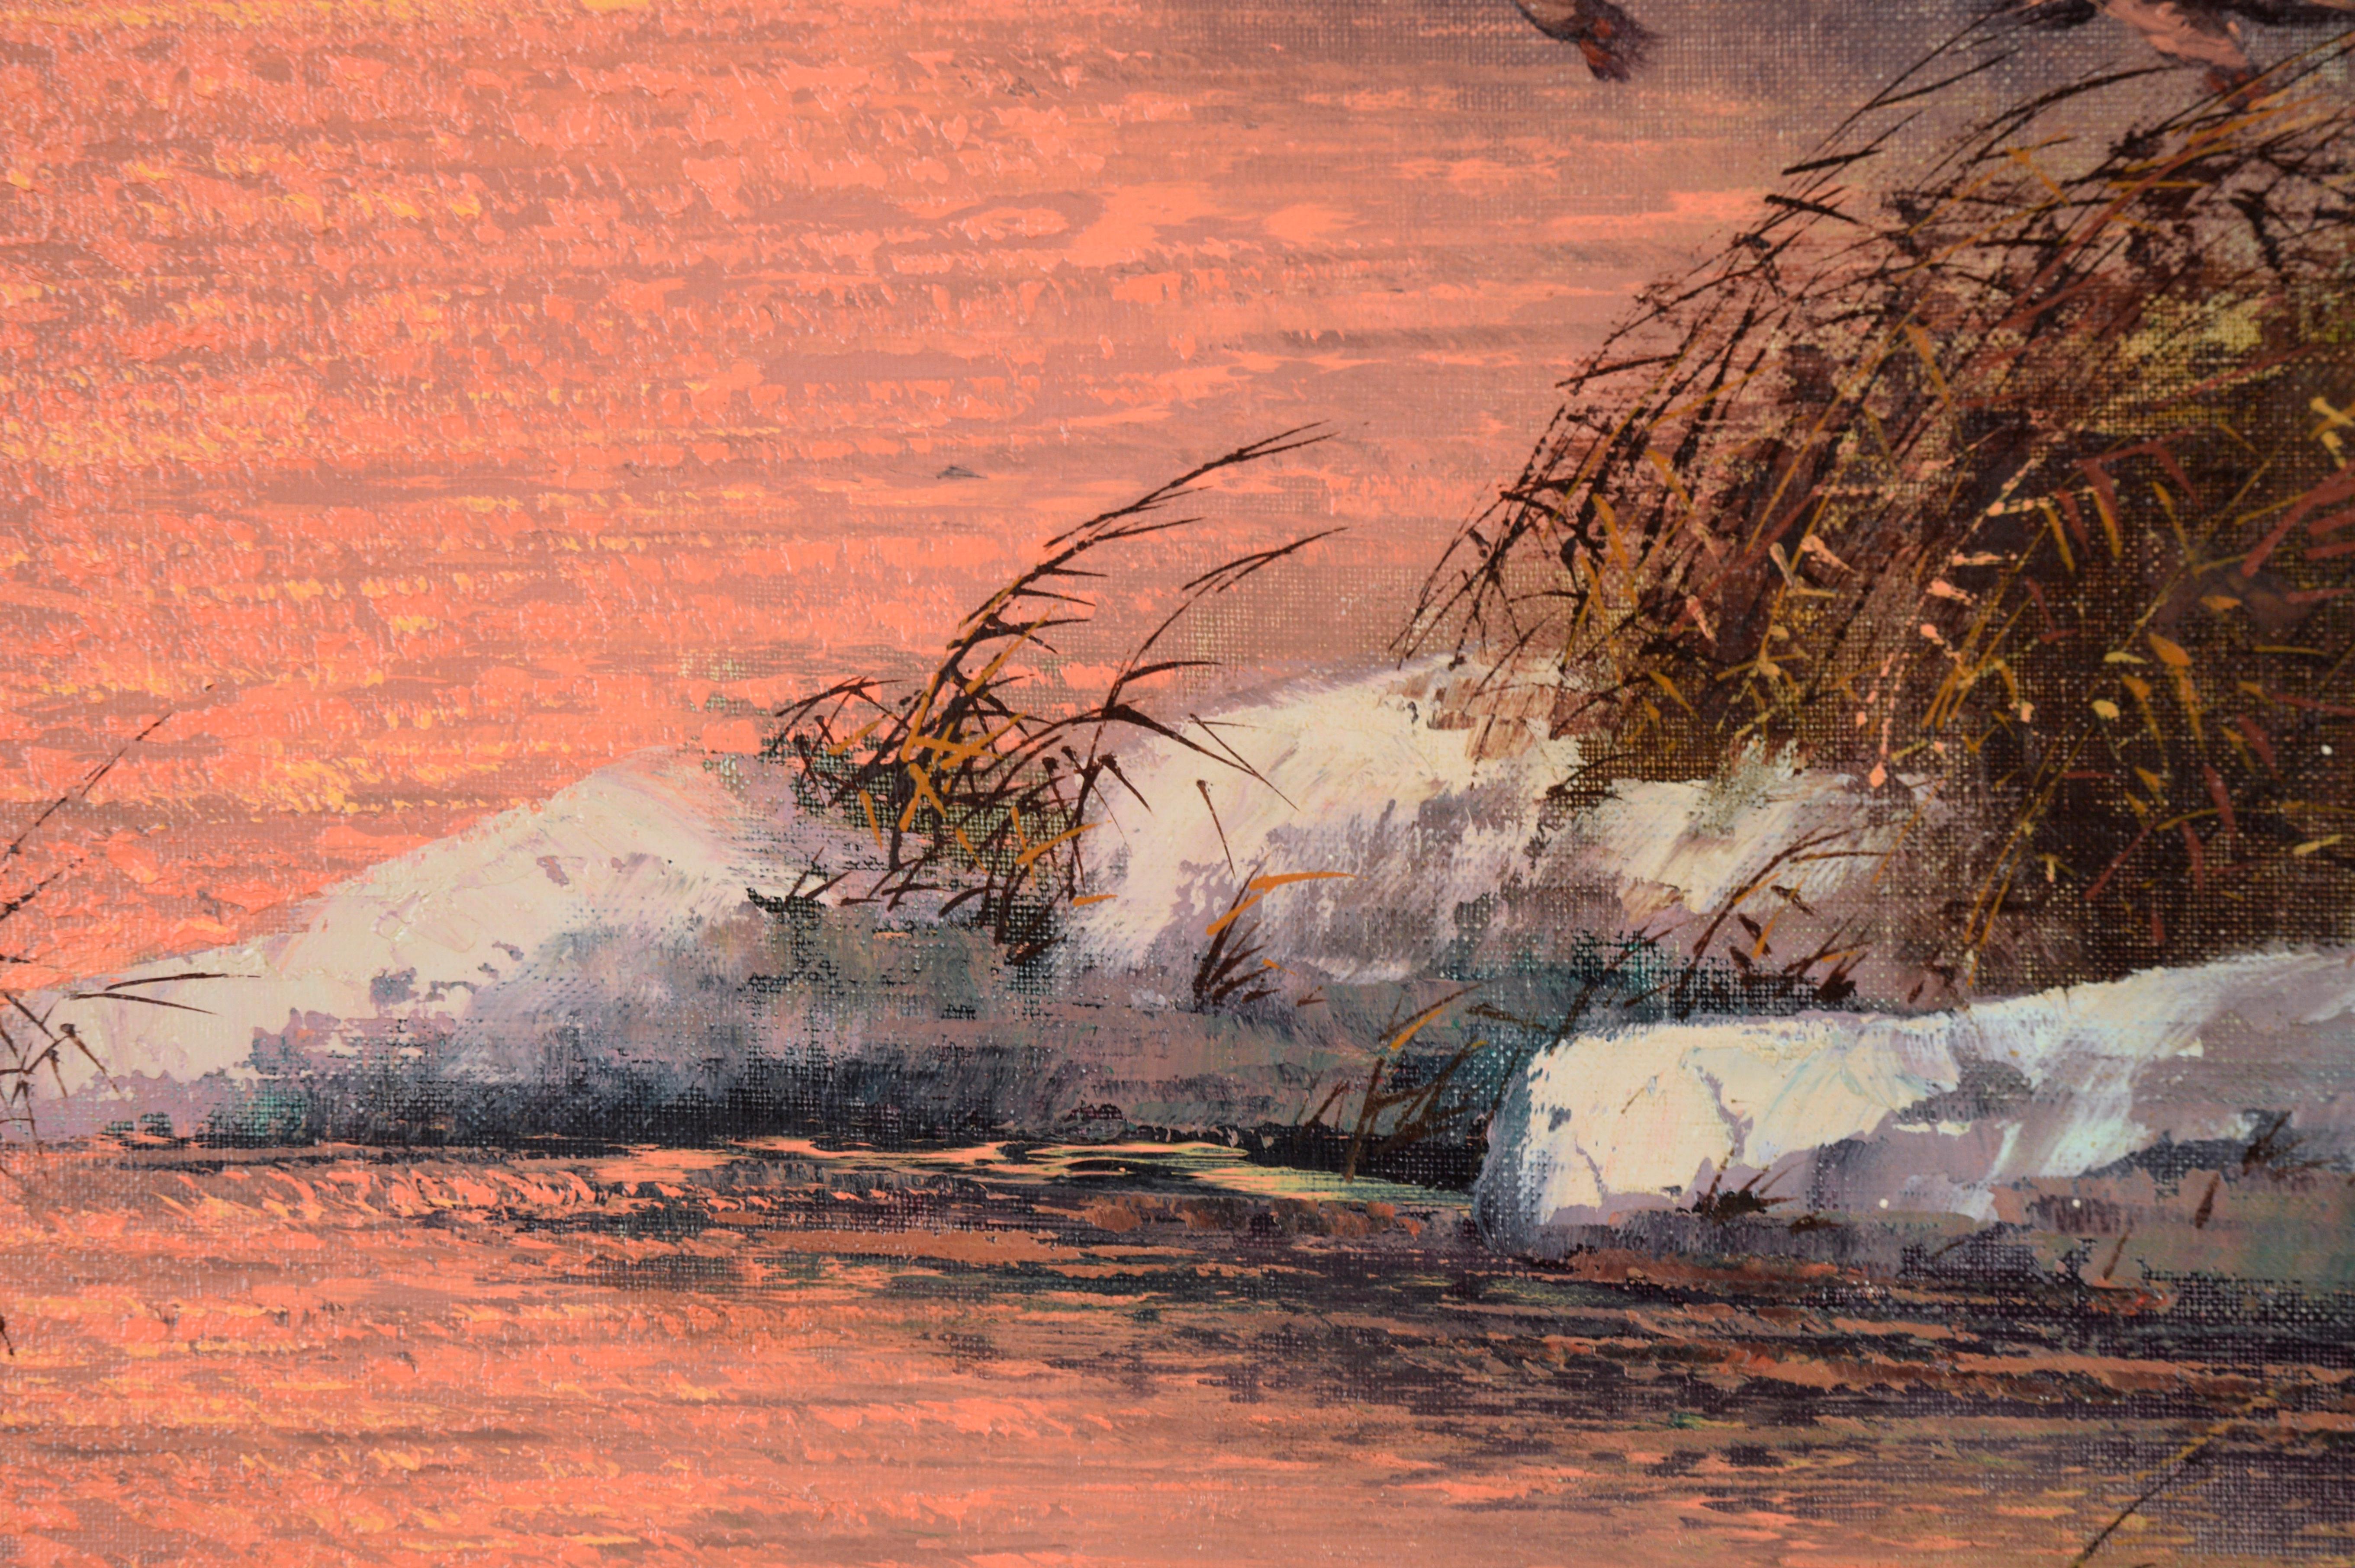 Ducks Flying Over the Lake at Sunset - Impressionist Painting by Kiljan